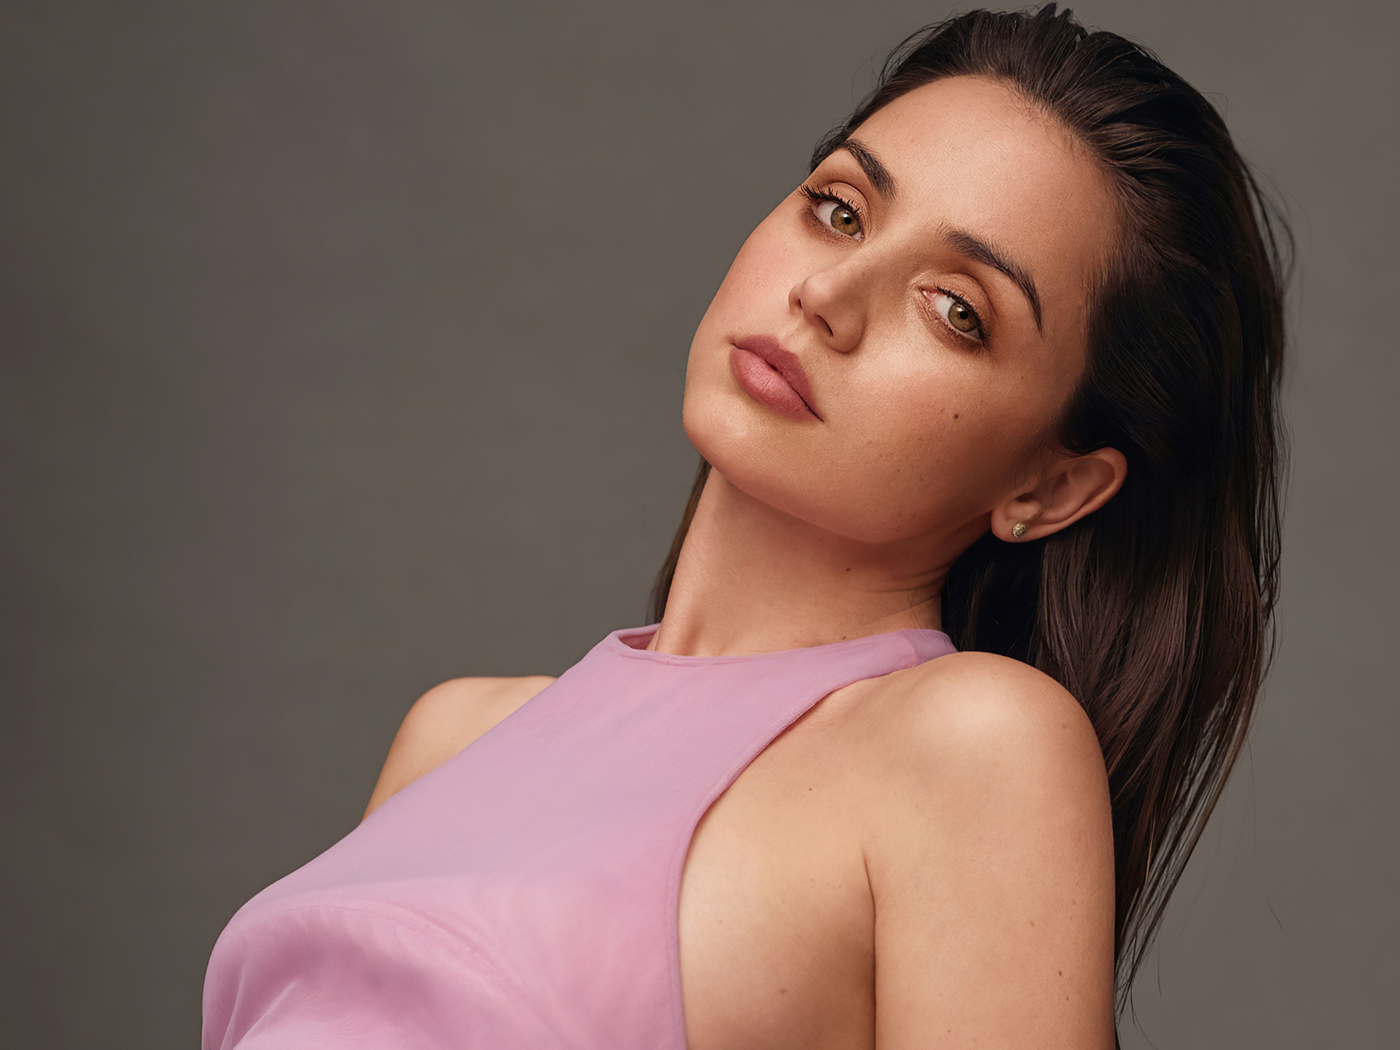 Actress Ana de Armas on a gray background in a pink sweater